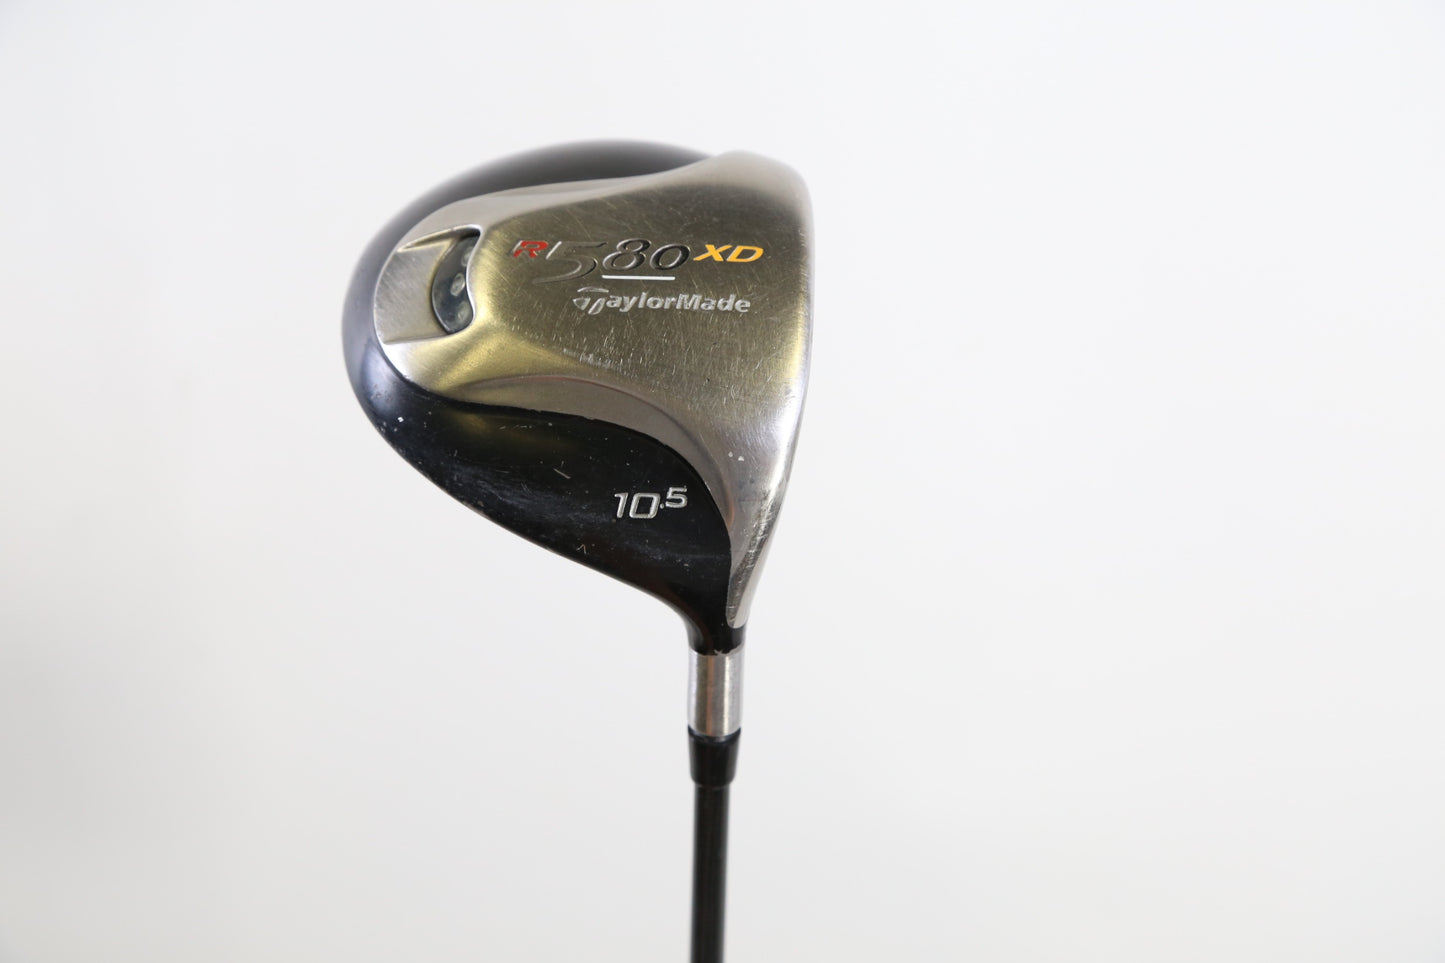 Used TaylorMade R580 XD Driver - Right-Handed - 10.5 Degrees - Stiff Flex